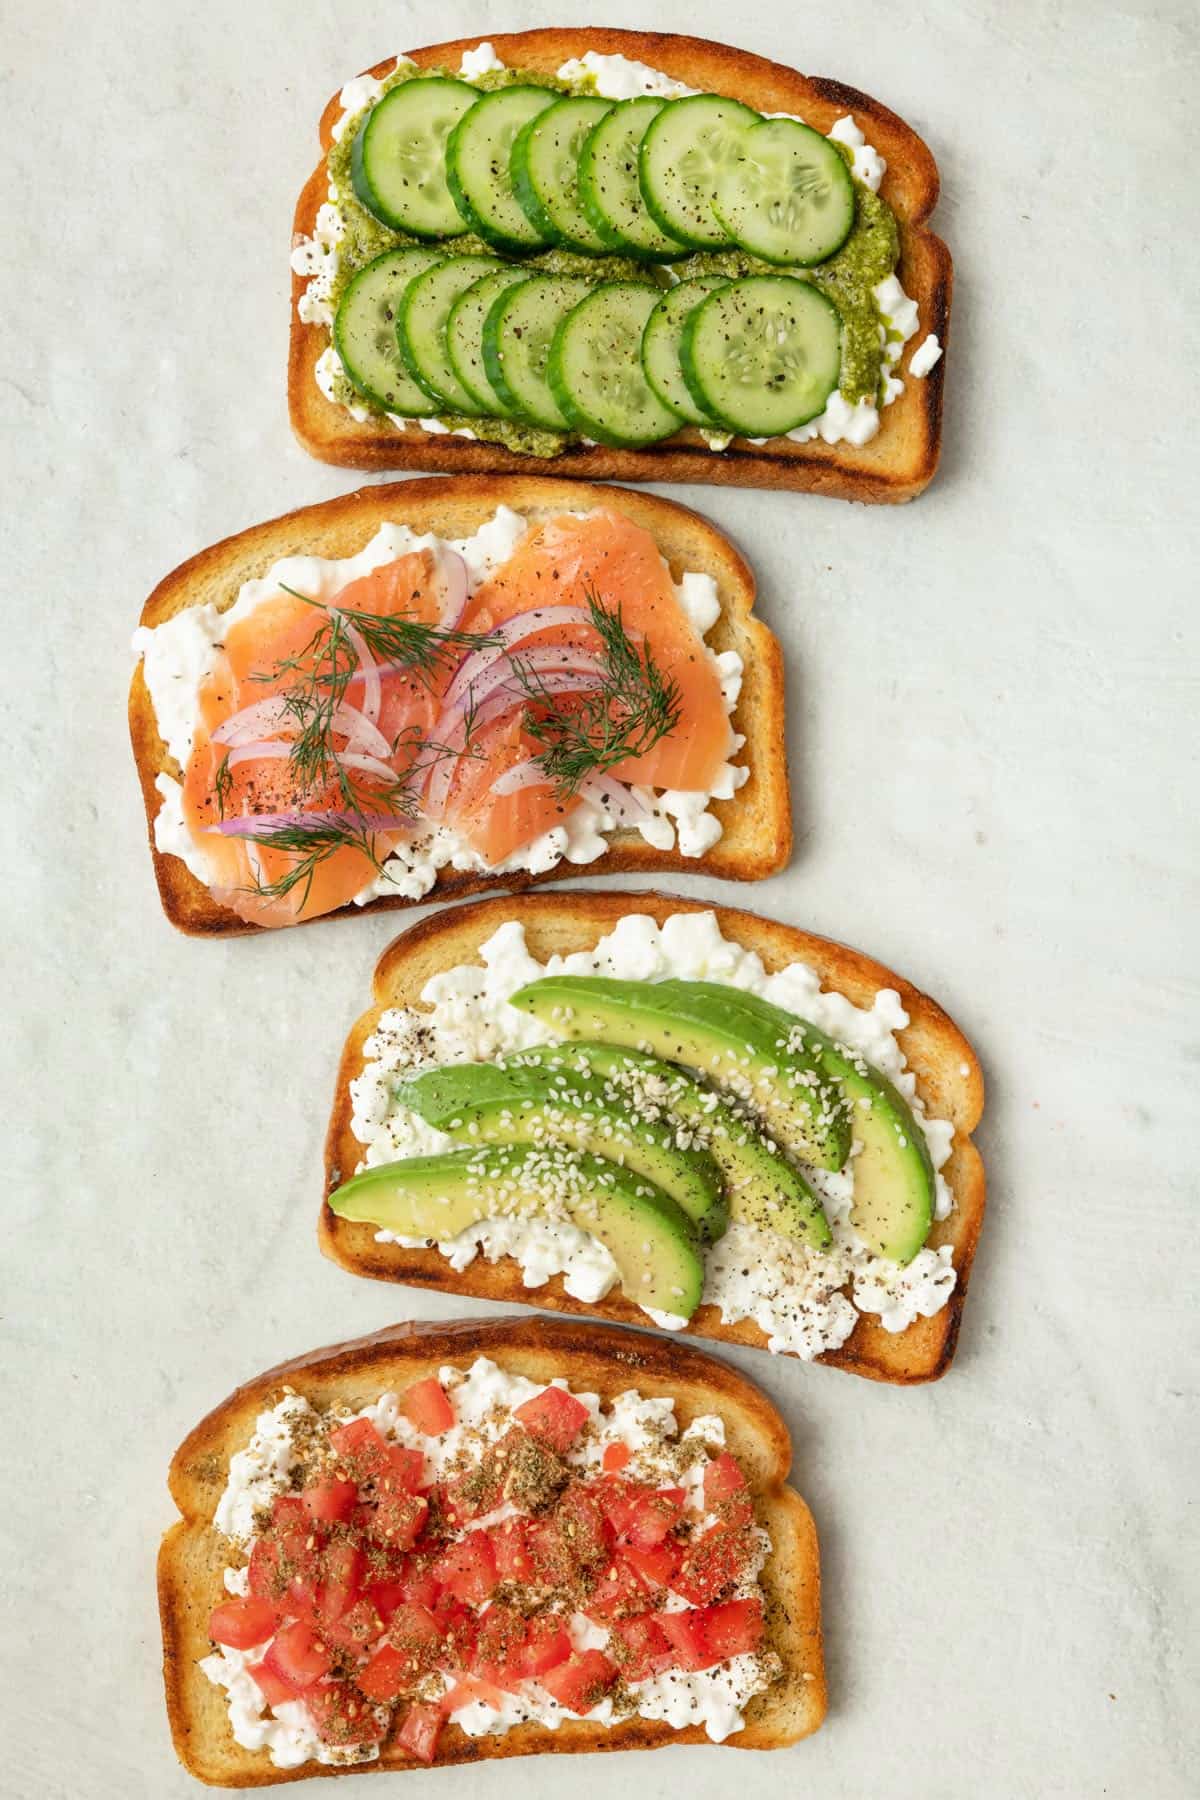 4 cottage cheese toasts with various toppings, from top to bottom: 1- sliced cucumbers and pesto, 2- smoked salmon, red onion, and fresh dill, 3- sliced avocado and sesame seeds, and 4- diced tomatoes and za'atar.